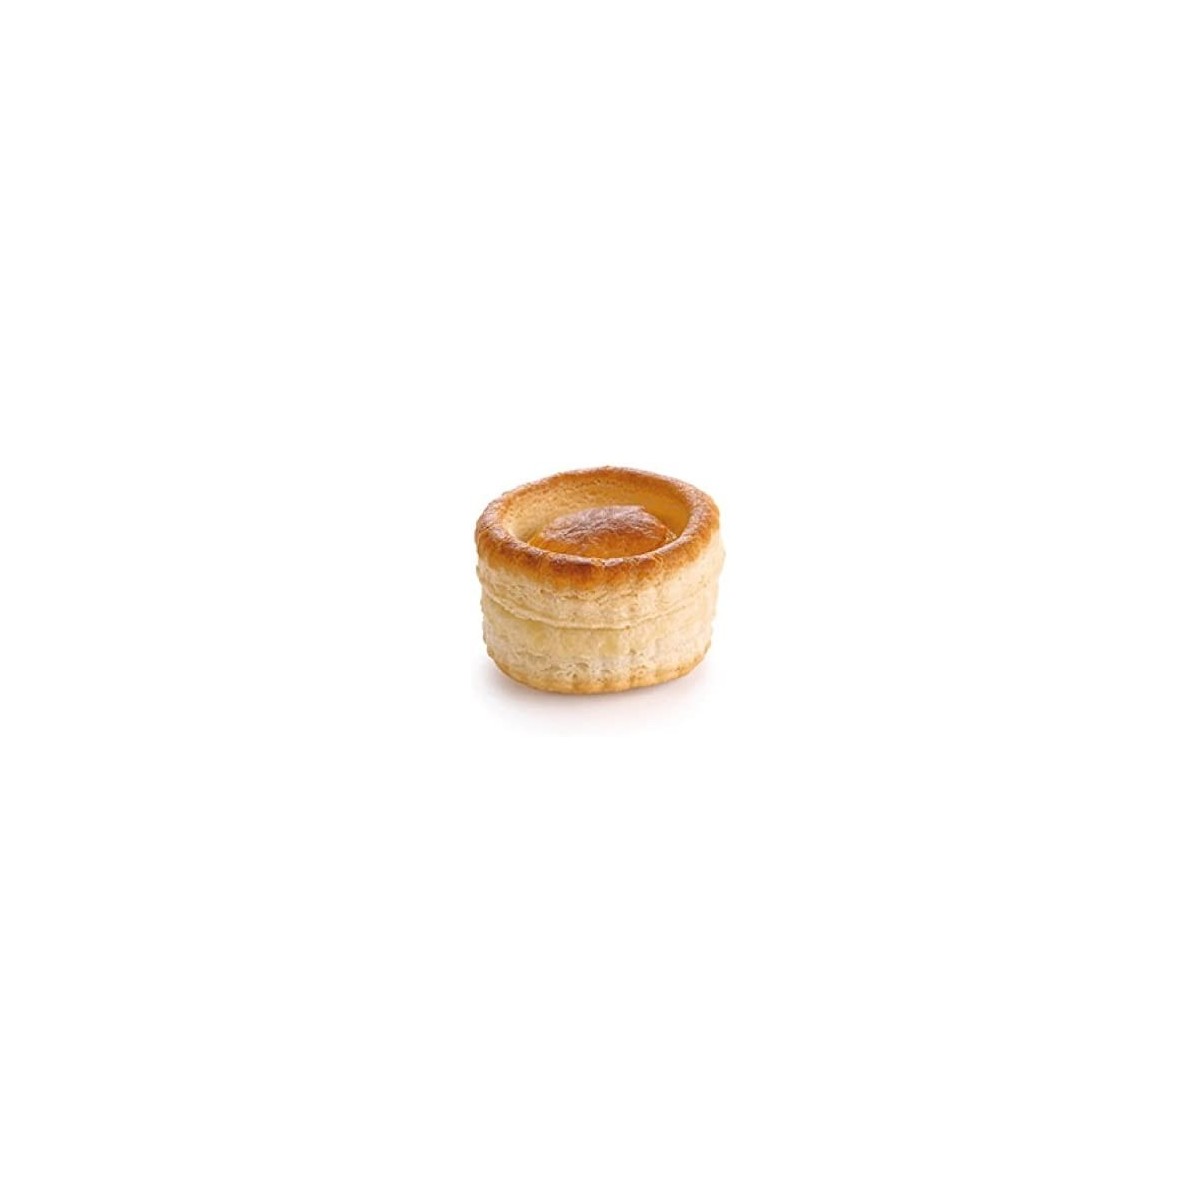 PIDY EMPTY BOUCHEE PUFF PASTRY Ø5,5CM H3.8CMFIXED HAT 40PIECES